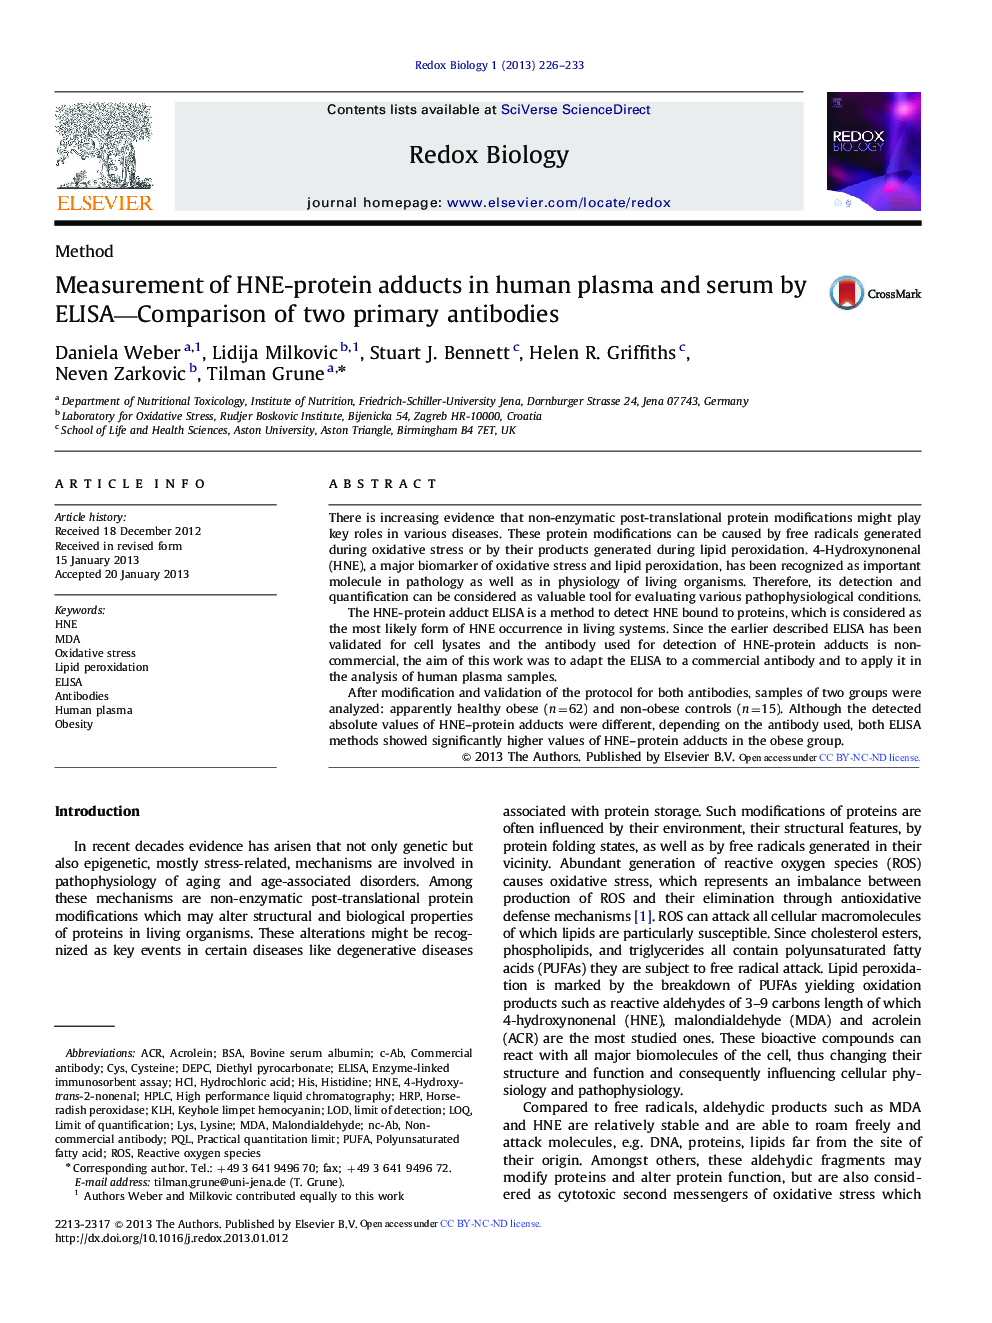 Measurement of HNE-protein adducts in human plasma and serum by ELISA—Comparison of two primary antibodies